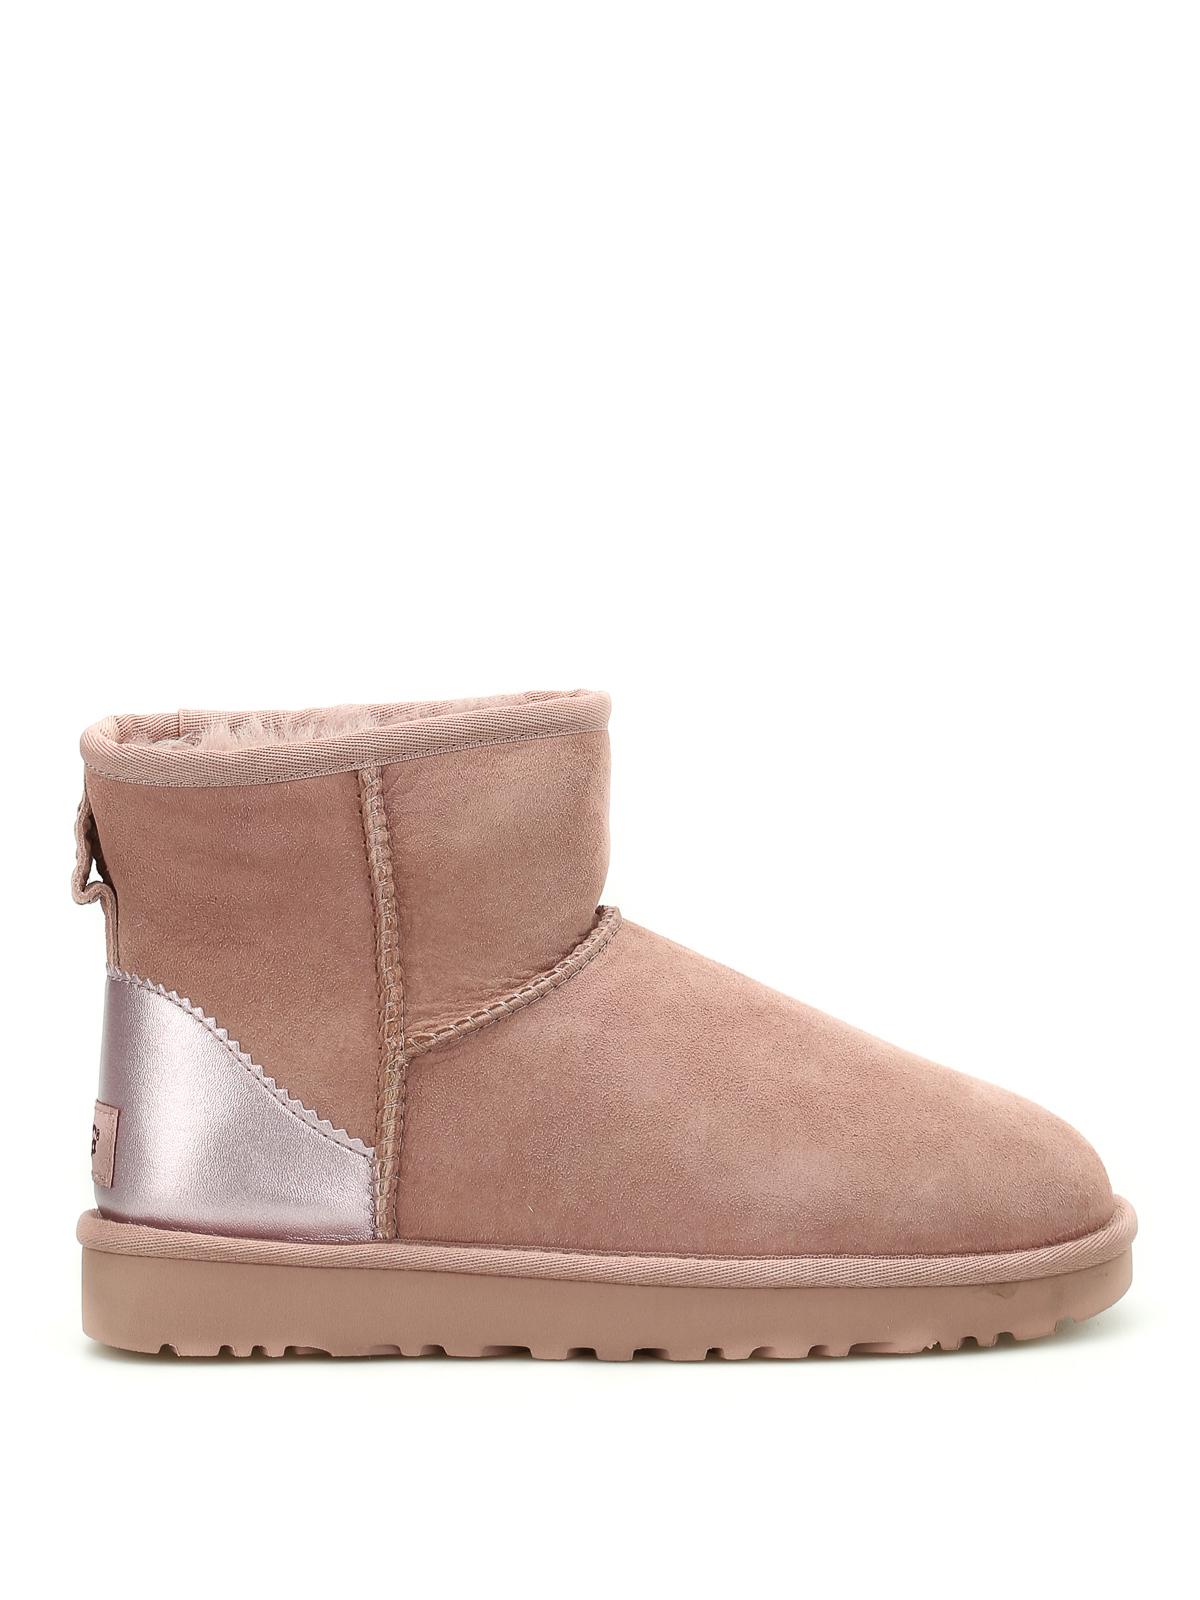 theft Obsession Ambient Ankle boots Ugg - Classic Mini II metallic booties - 1019029WDUS